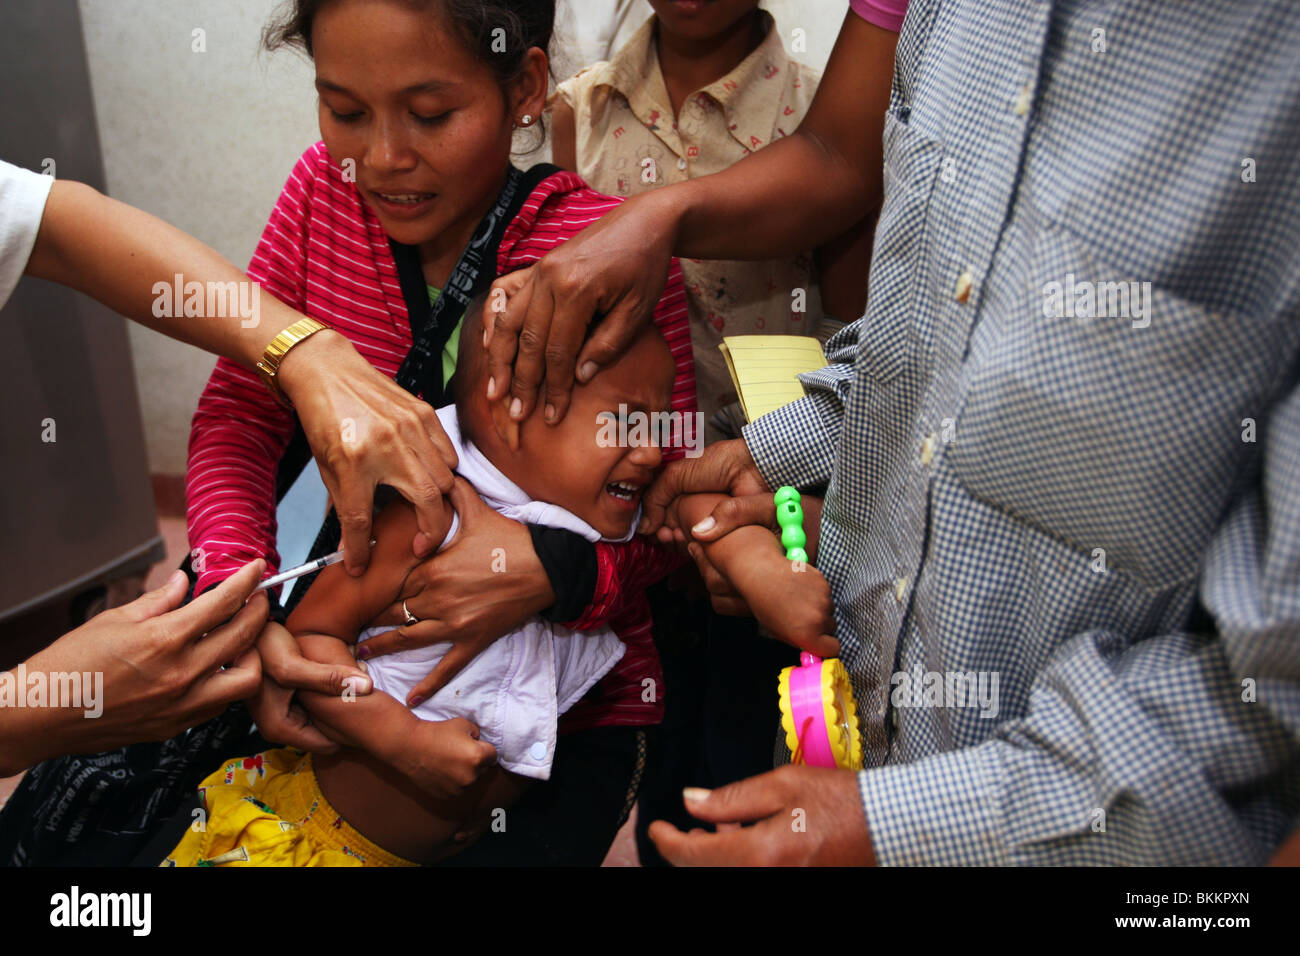 A Cambodian child is inoculated for TB at Dr Beat's hospital, Jayavarman V11 Hospital, Siem Reap, Cambodia. Stock Photo